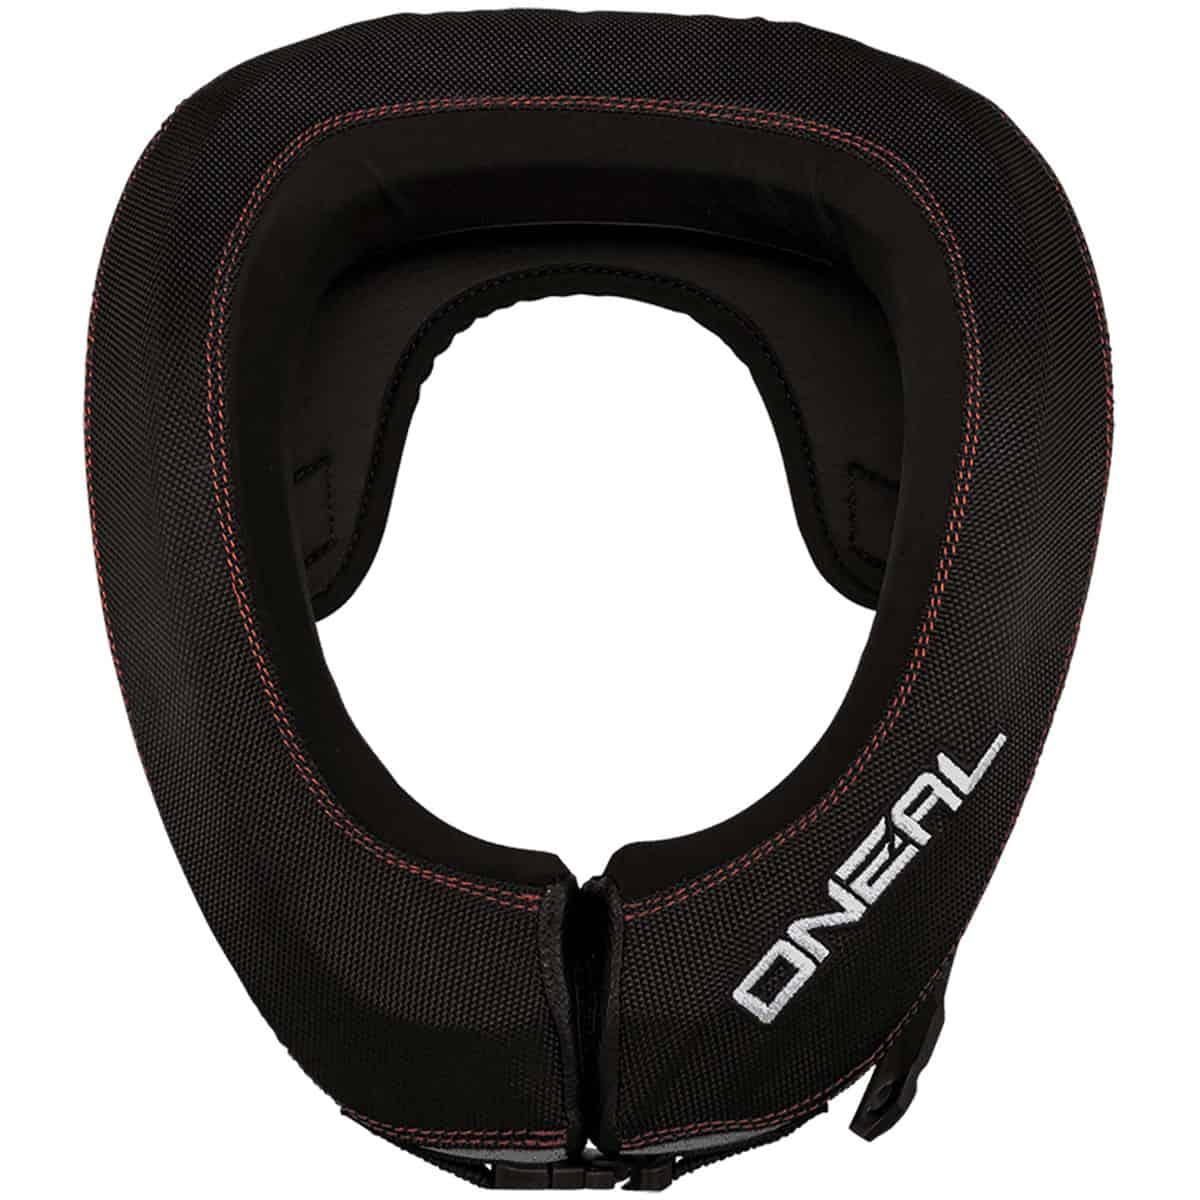 This is sized specifically for youth riders to provide the protection needed when off roading.-3